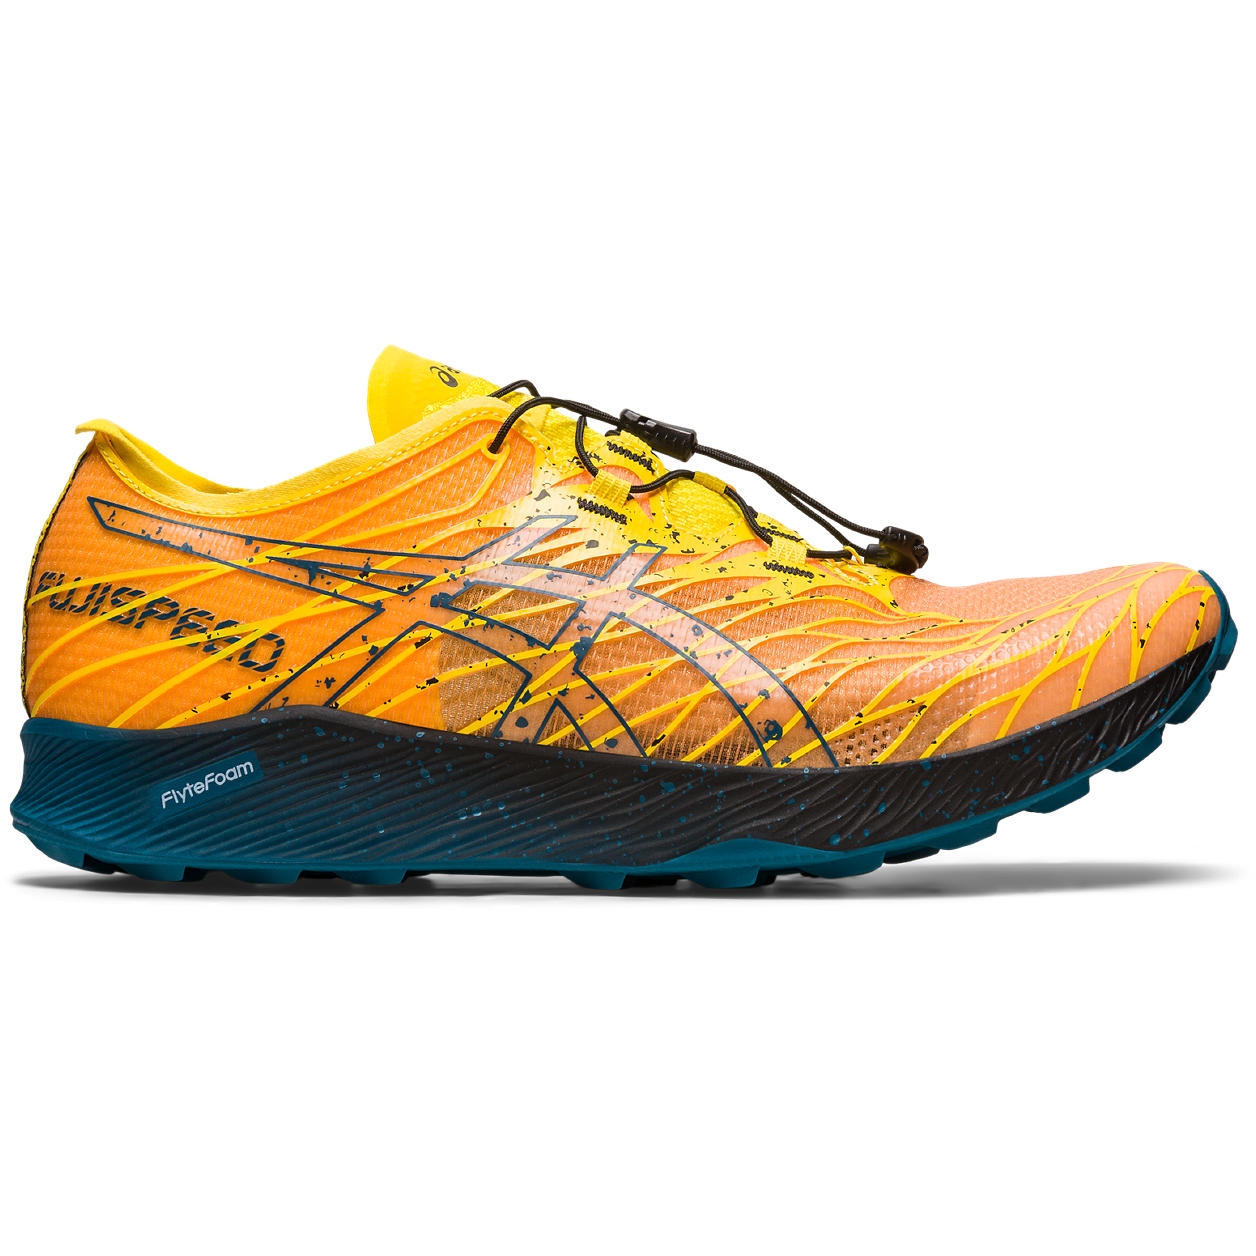 Image of asics Fujispeed Trail Running Shoes Men - golden yellow/ink teal